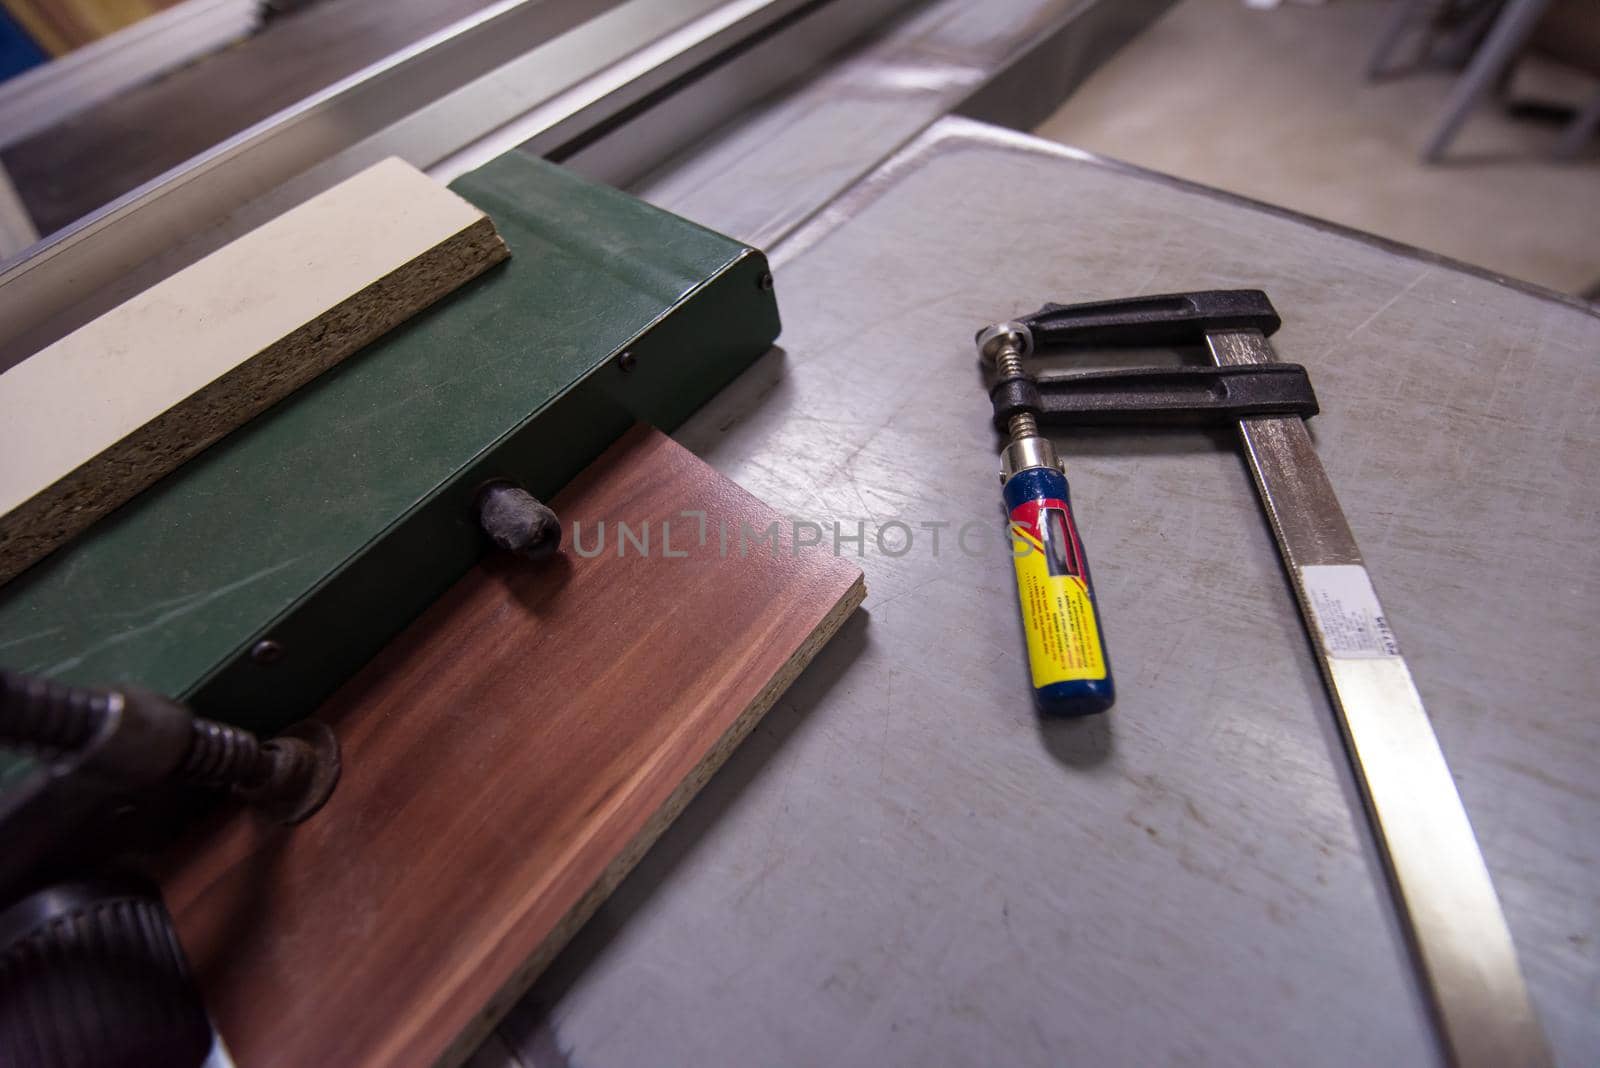 clamp and ruler tools on desk in factory for the production of wooden furniture